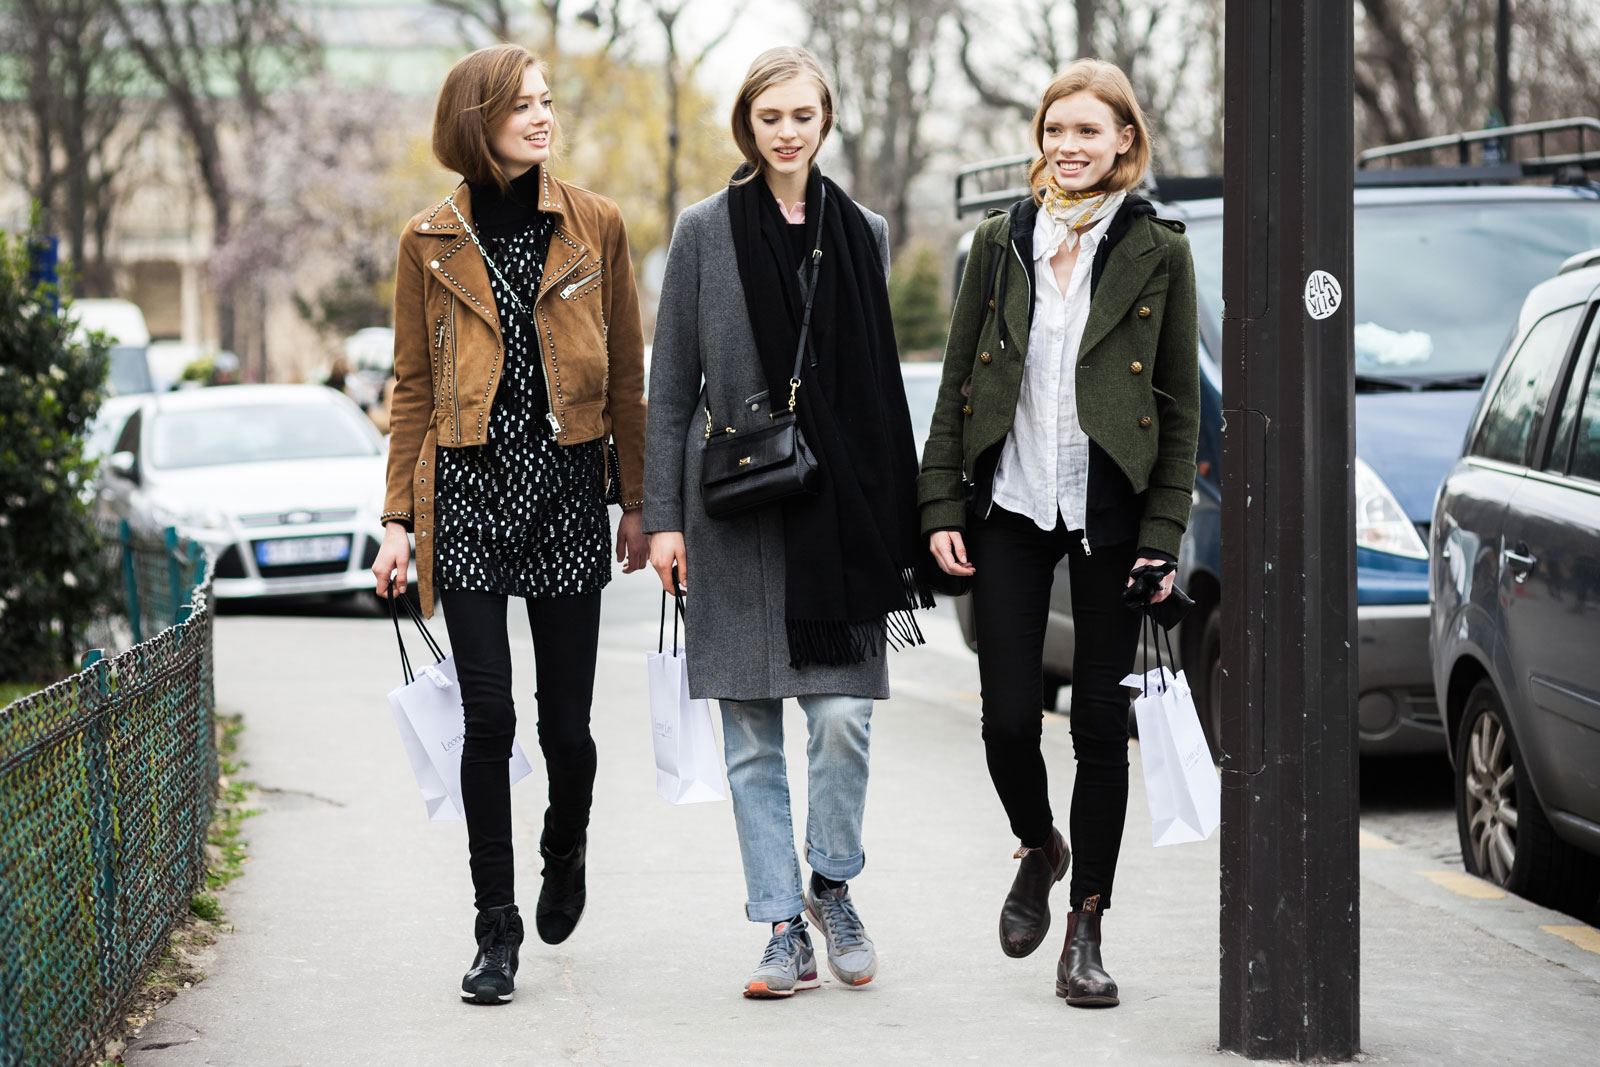 Models Emmy Rappe, Hedvig Palm and Julia Hafstrom after the Giambattista Valli Fall/Winter 2015-2016 fashion show in Paris, France